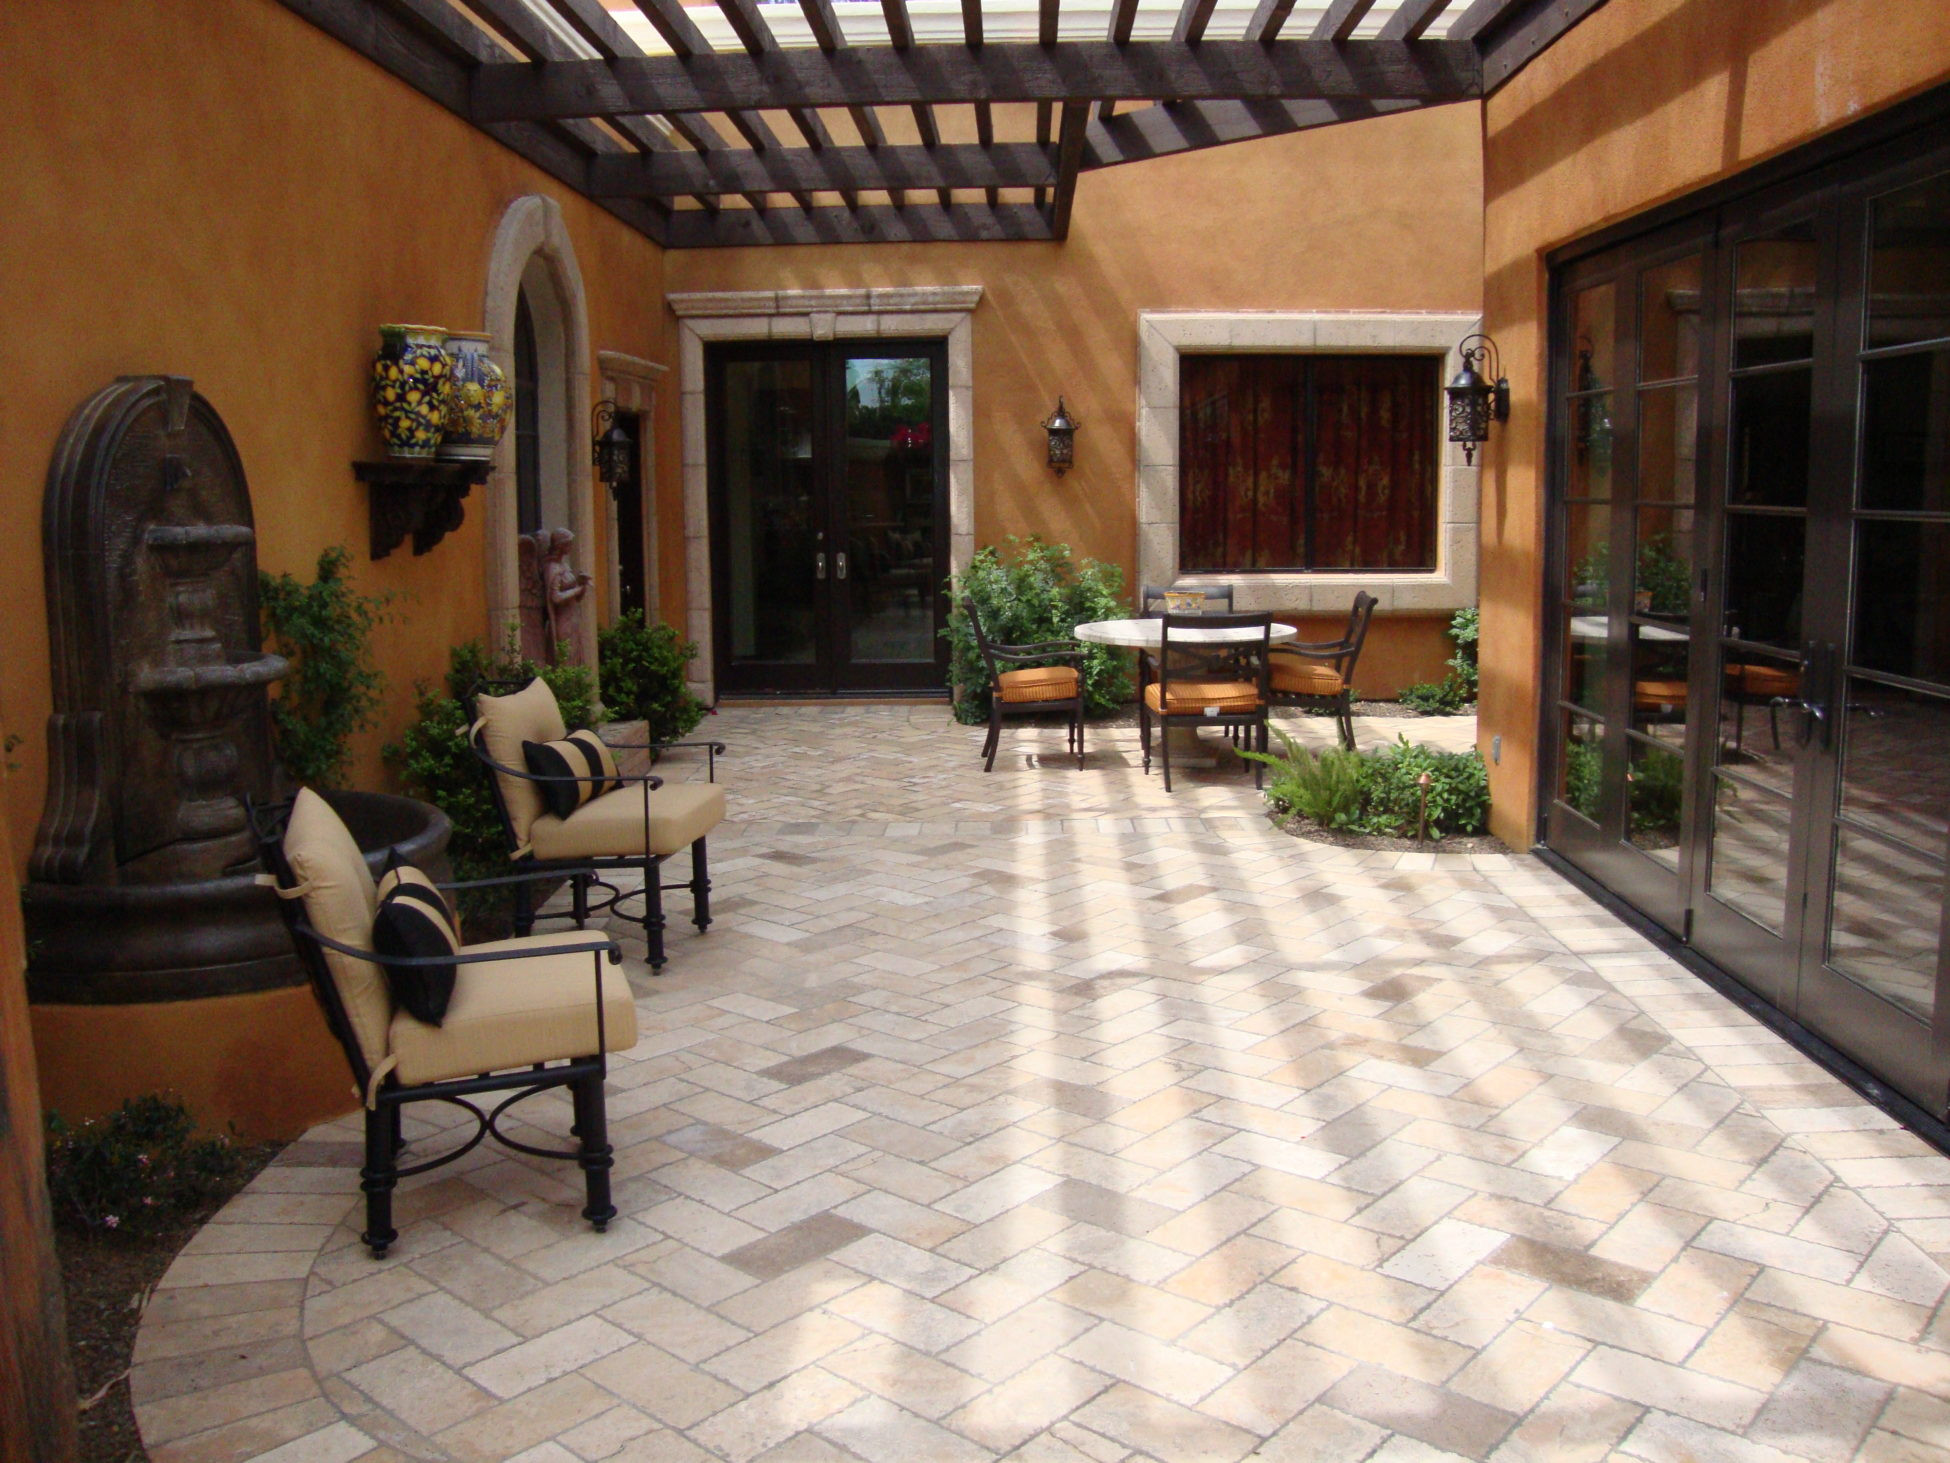 Backyard Ideas With Pavers
 Paver Designs and Paver Ideas for Your Backyard Patios